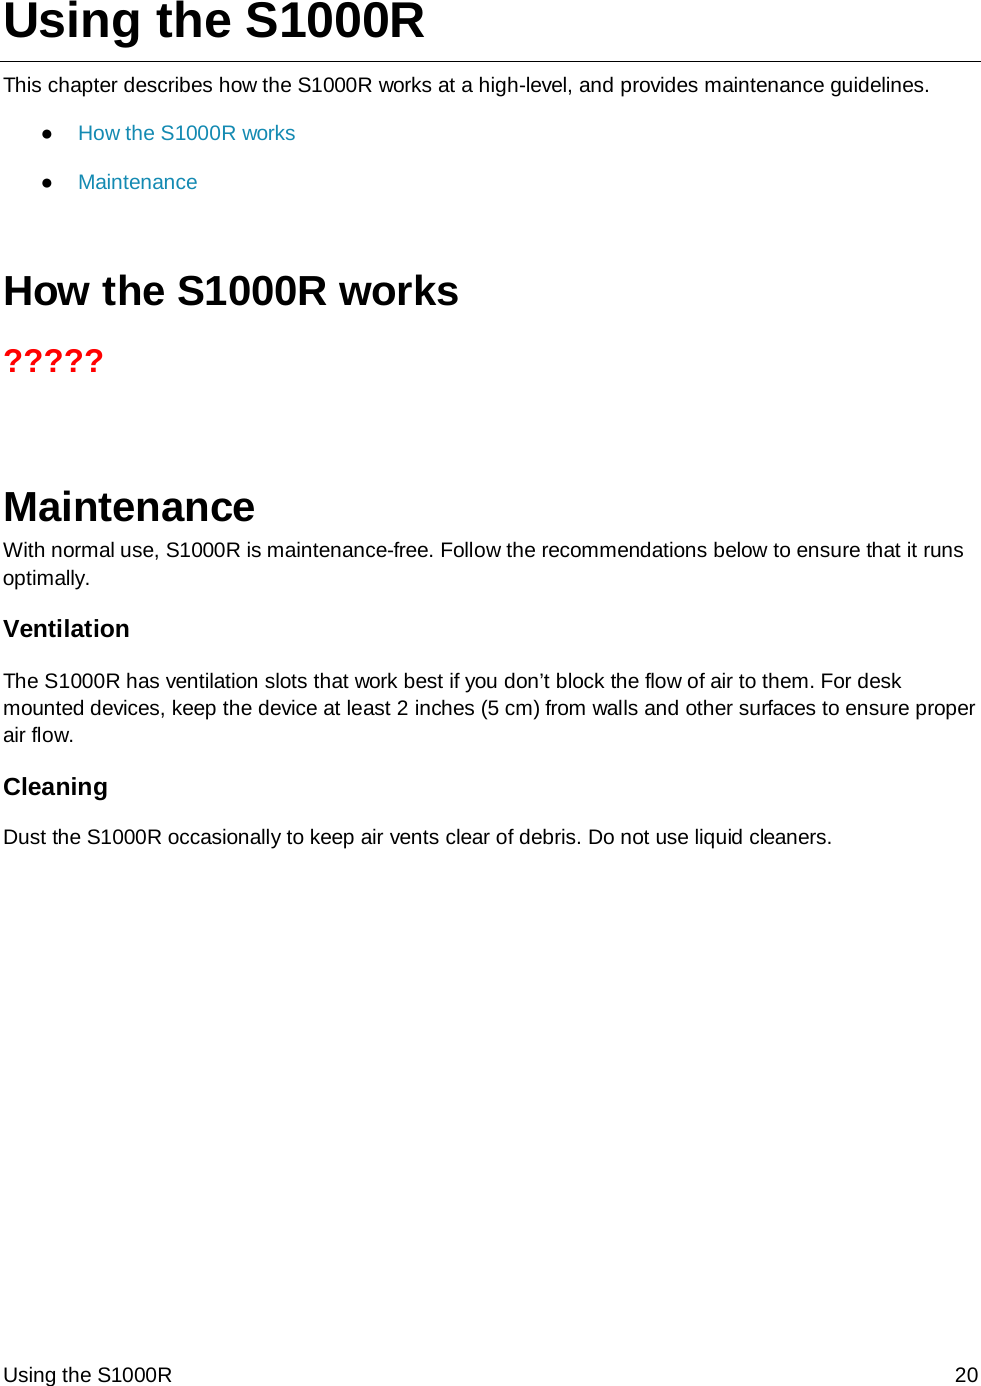 Using the S1000R 20 Using the S1000R This chapter describes how the S1000R works at a high-level, and provides maintenance guidelines. ● How the S1000R works ● Maintenance  How the S1000R works ?????   Maintenance With normal use, S1000R is maintenance-free. Follow the recommendations below to ensure that it runs optimally. Ventilation The S1000R has ventilation slots that work best if you don’t block the flow of air to them. For desk mounted devices, keep the device at least 2 inches (5 cm) from walls and other surfaces to ensure proper air flow.  Cleaning Dust the S1000R occasionally to keep air vents clear of debris. Do not use liquid cleaners. 